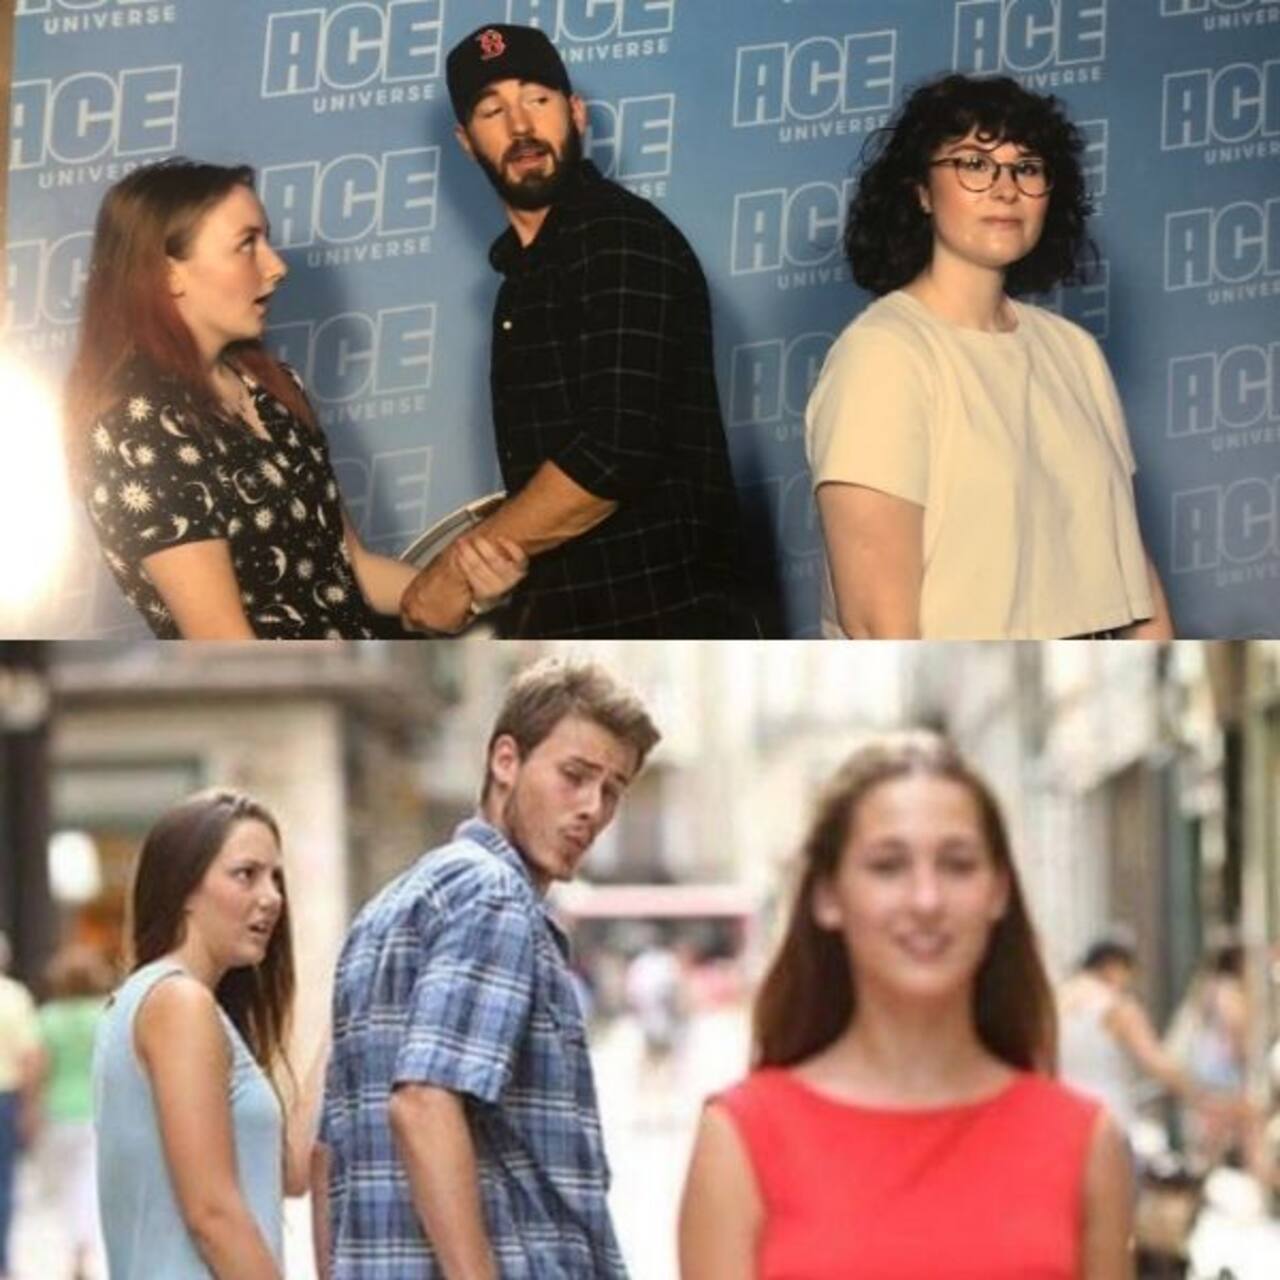 How I wish I was the girl Chris Evans was looking at when he recreated THIS meme!